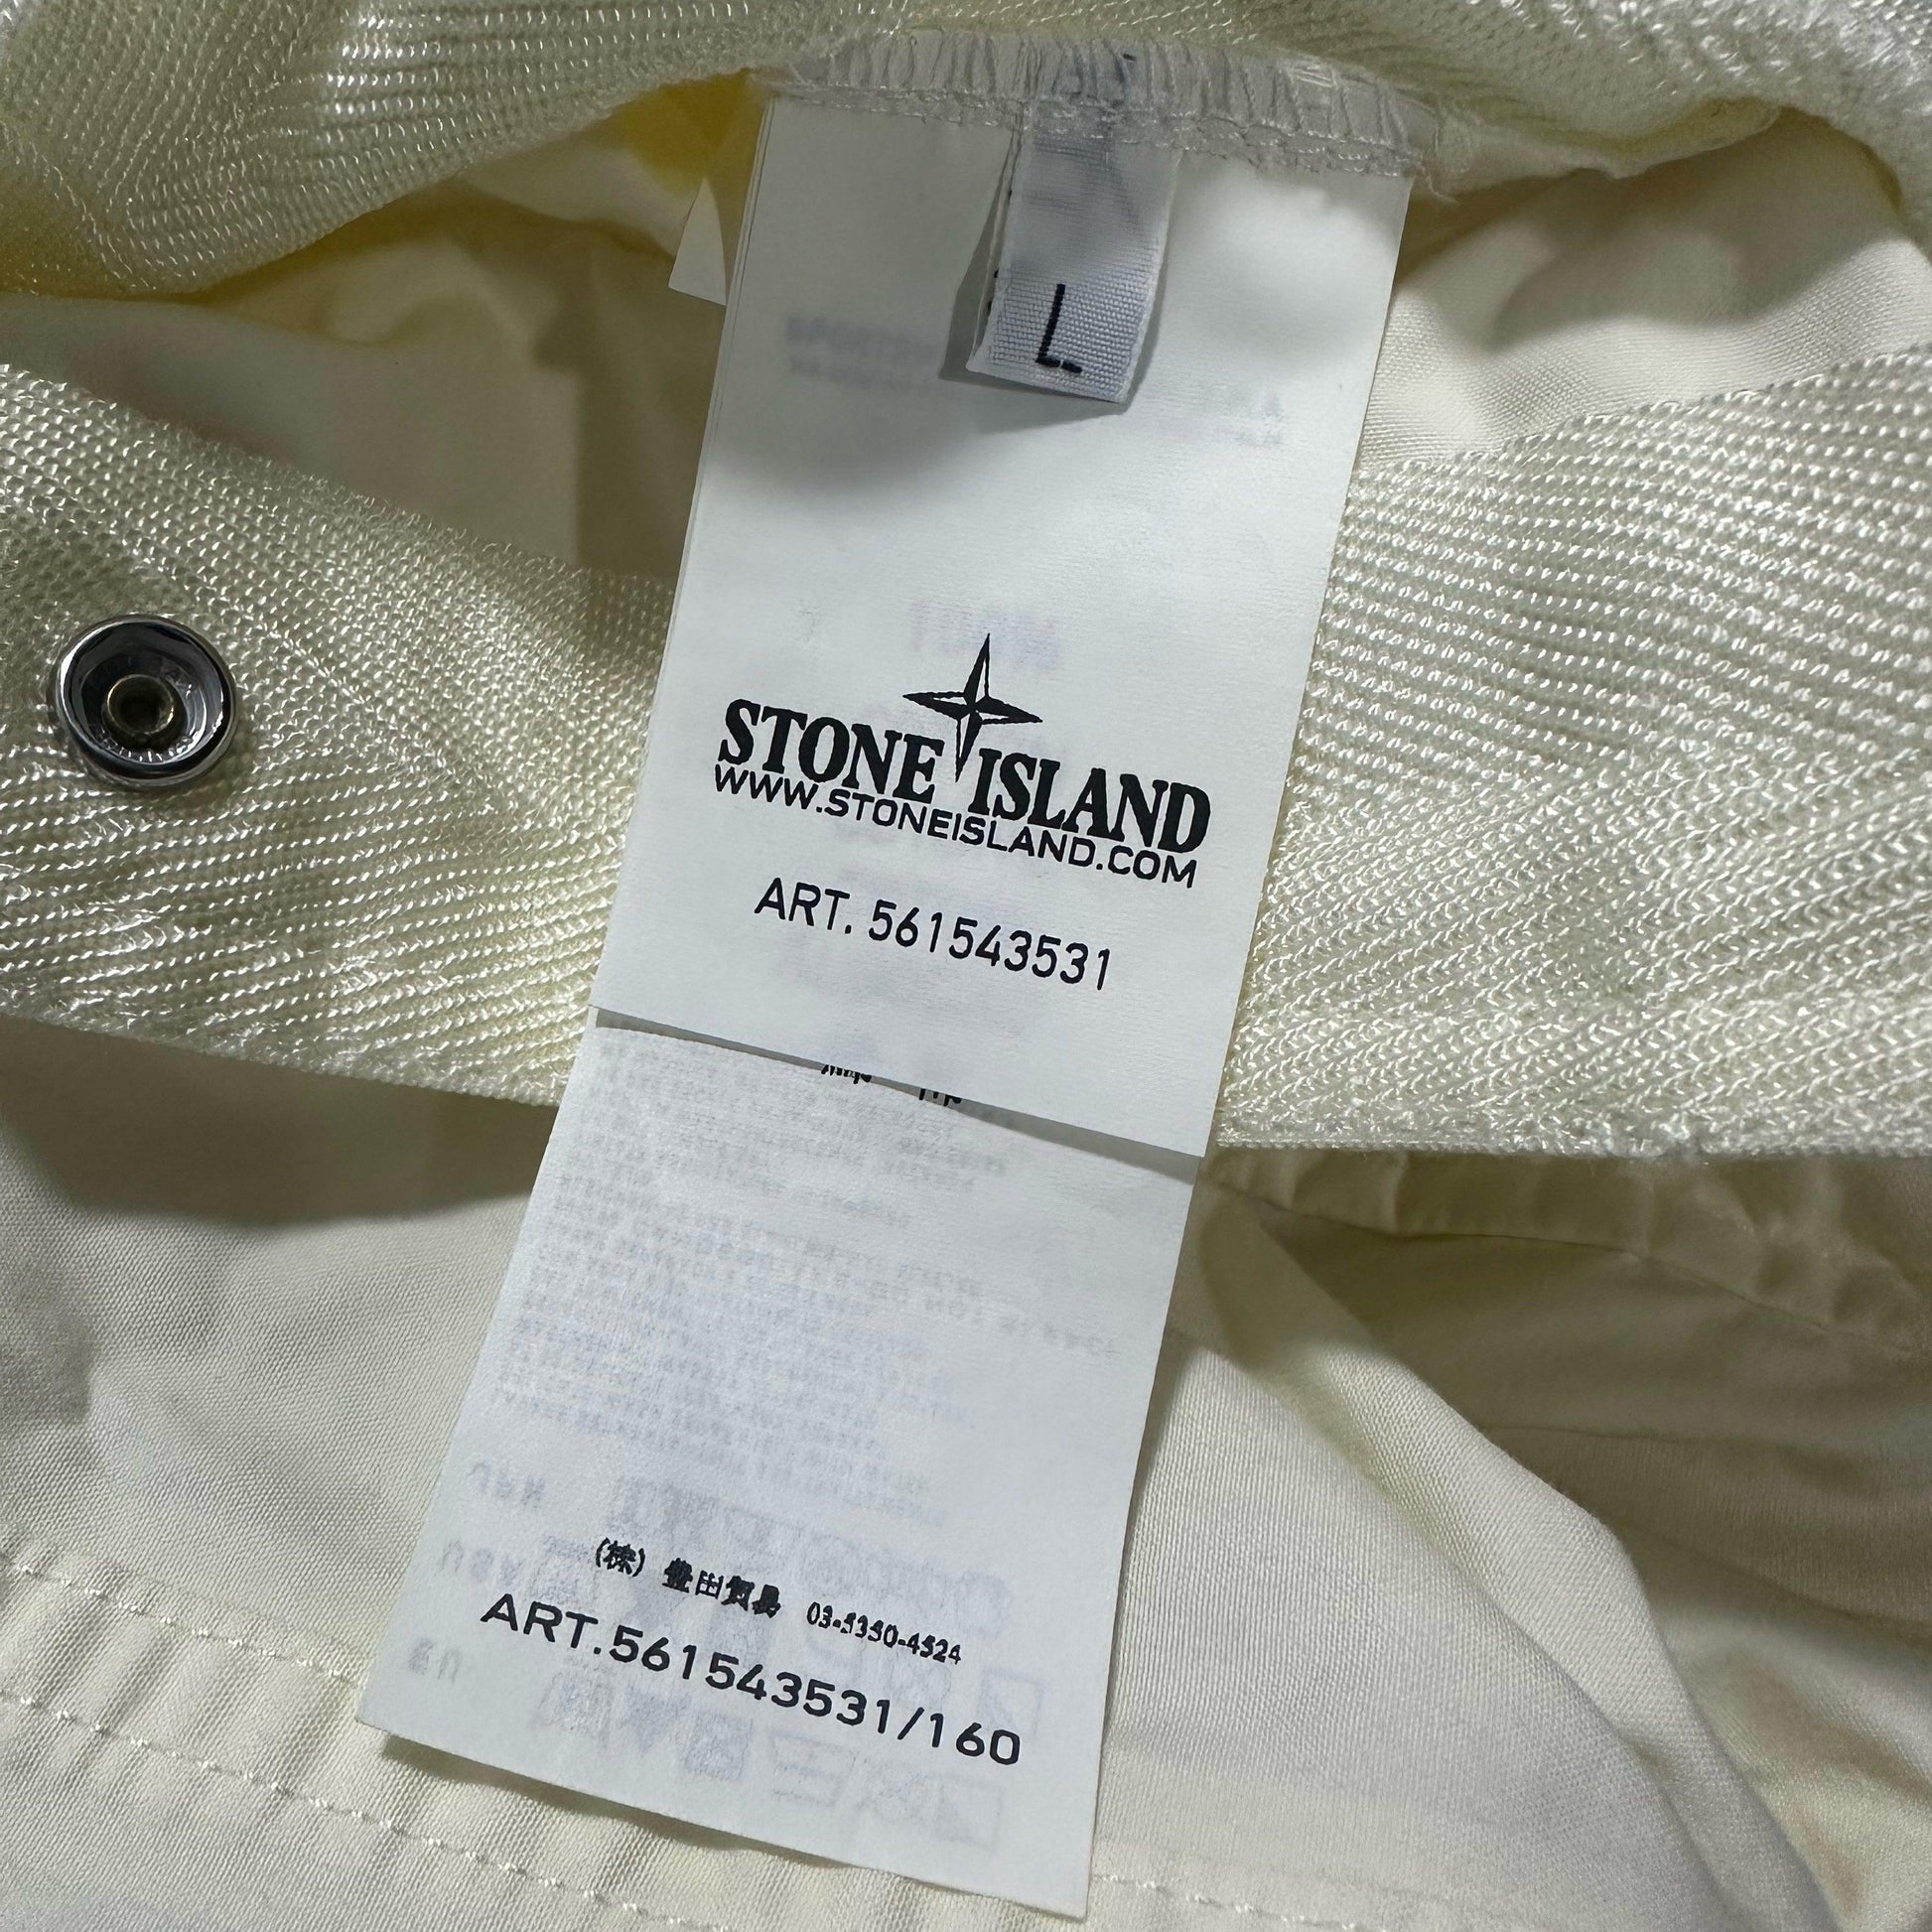 Stone Island Ghost Ventile Double Pocket Zip Up Jacket - Known Source